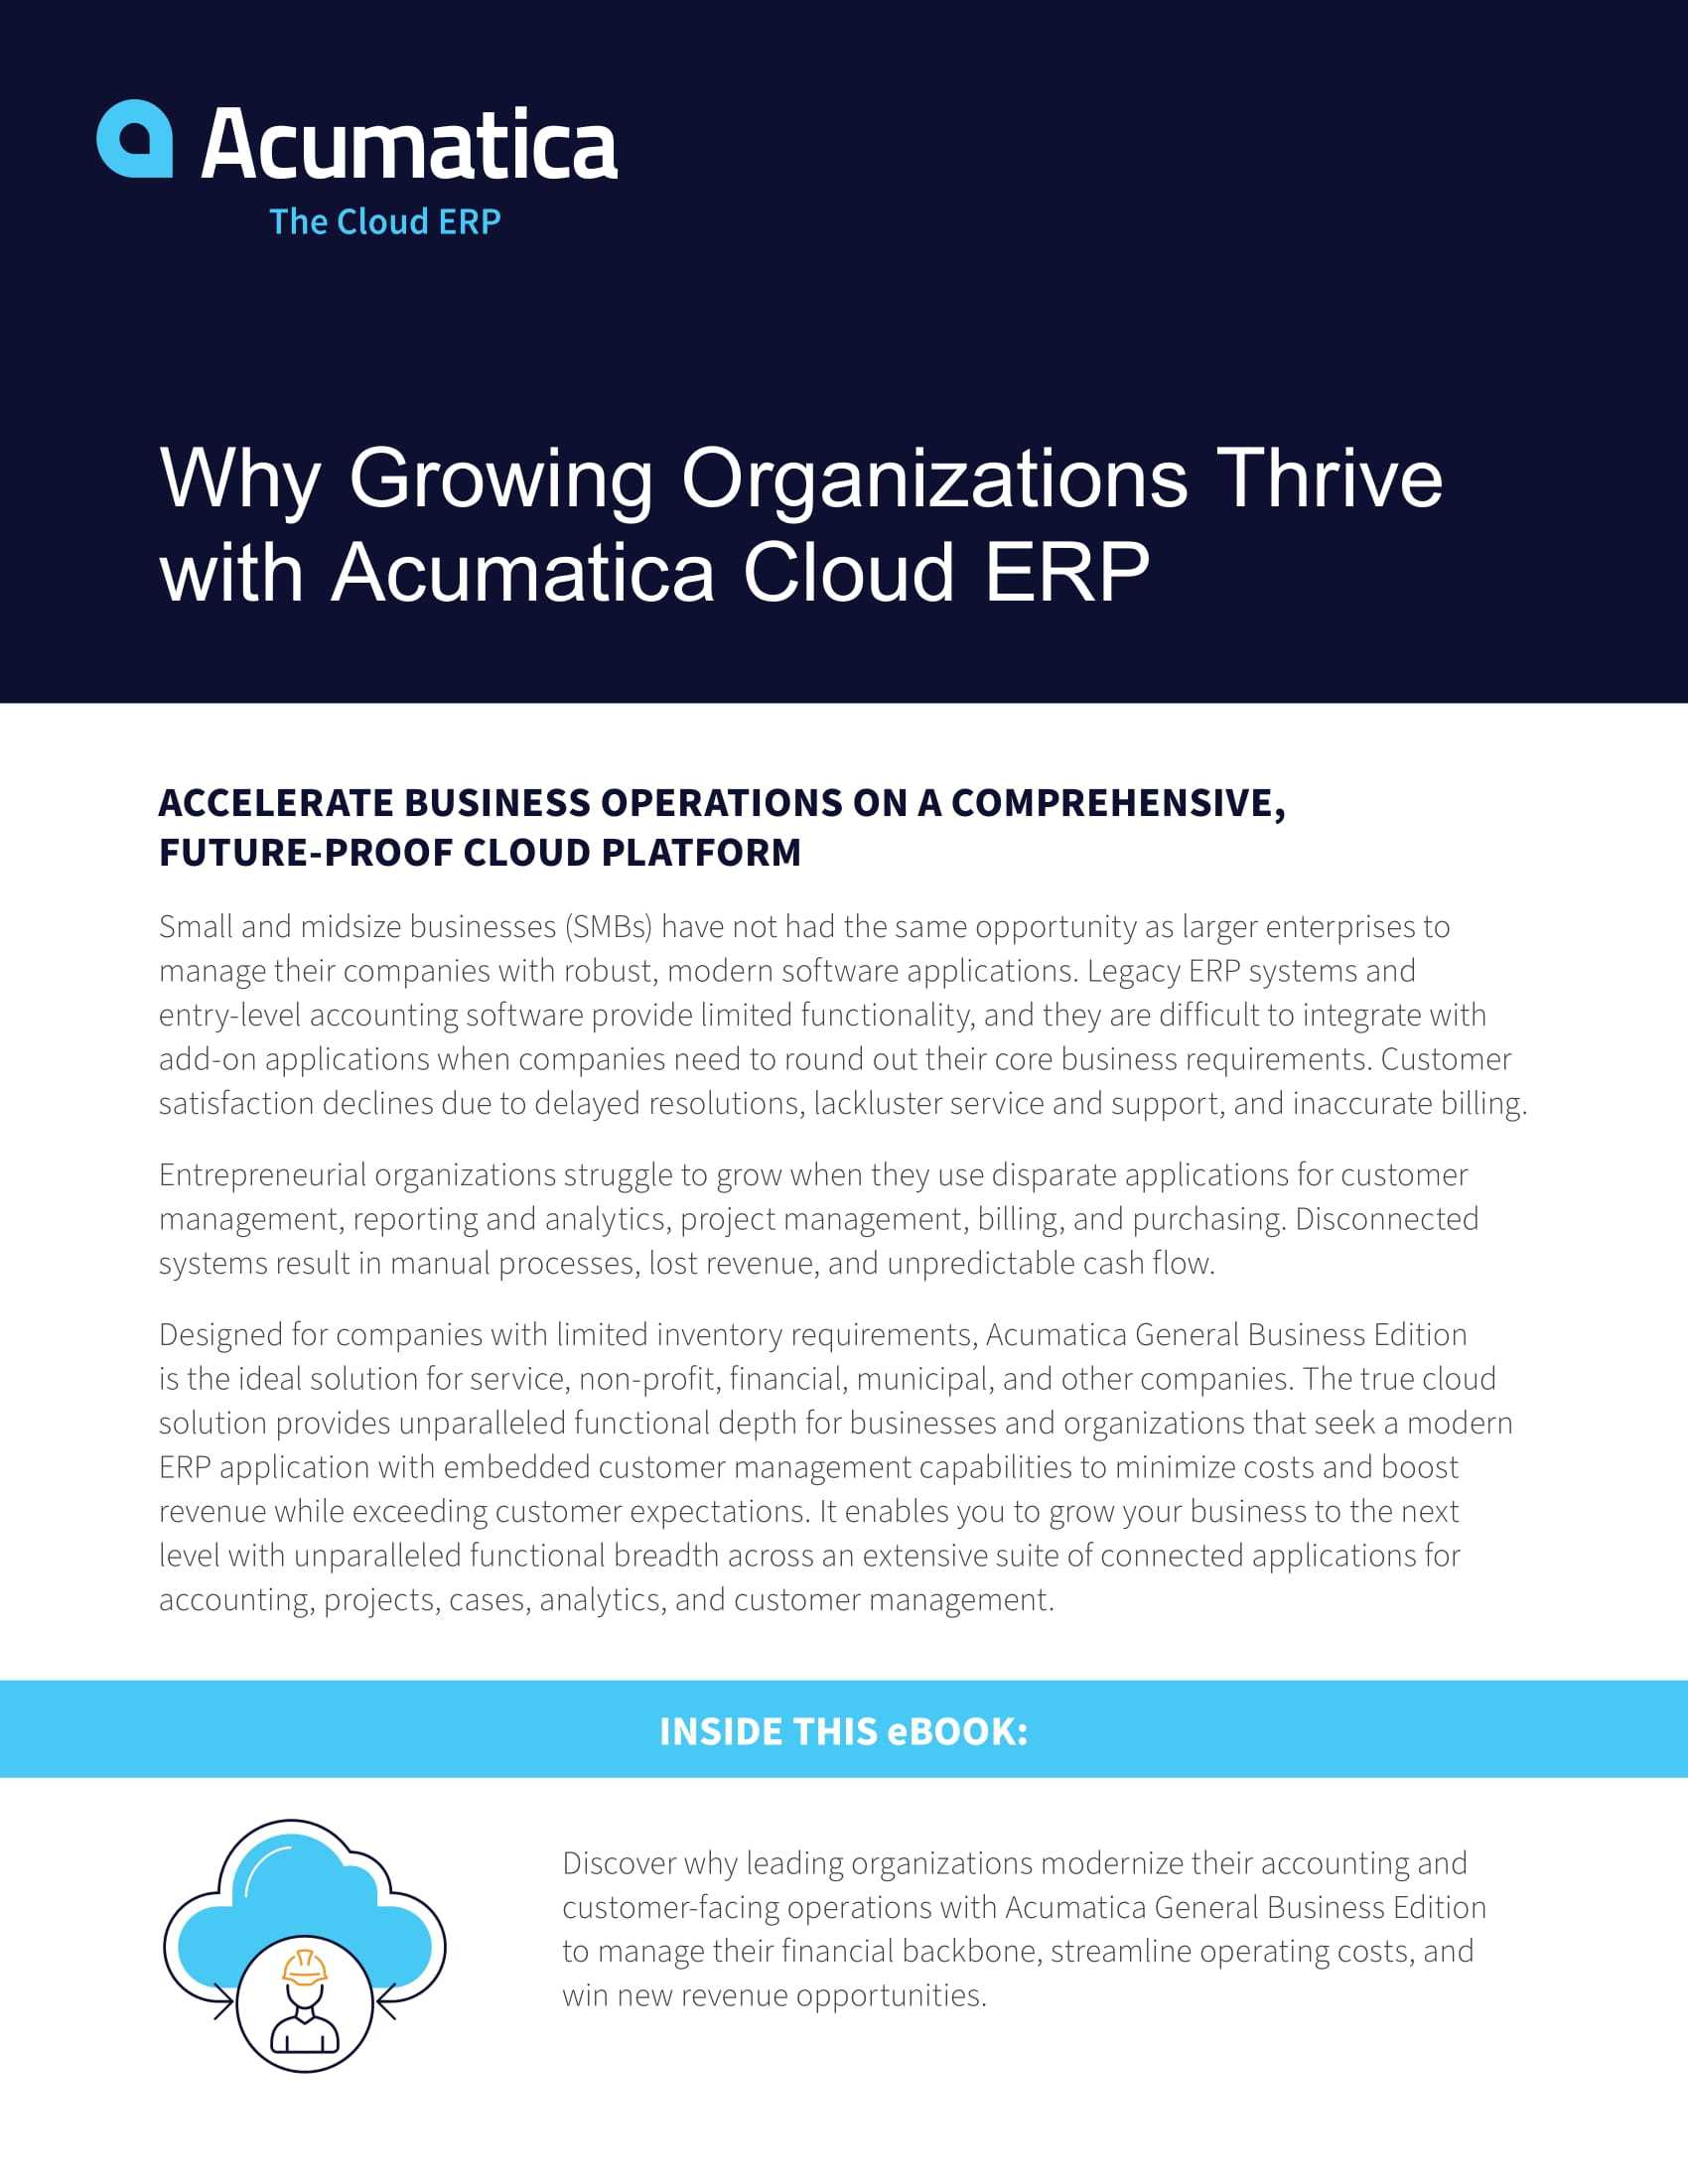 How to Grow Your Business Faster | Acumatica Cloud ERP,